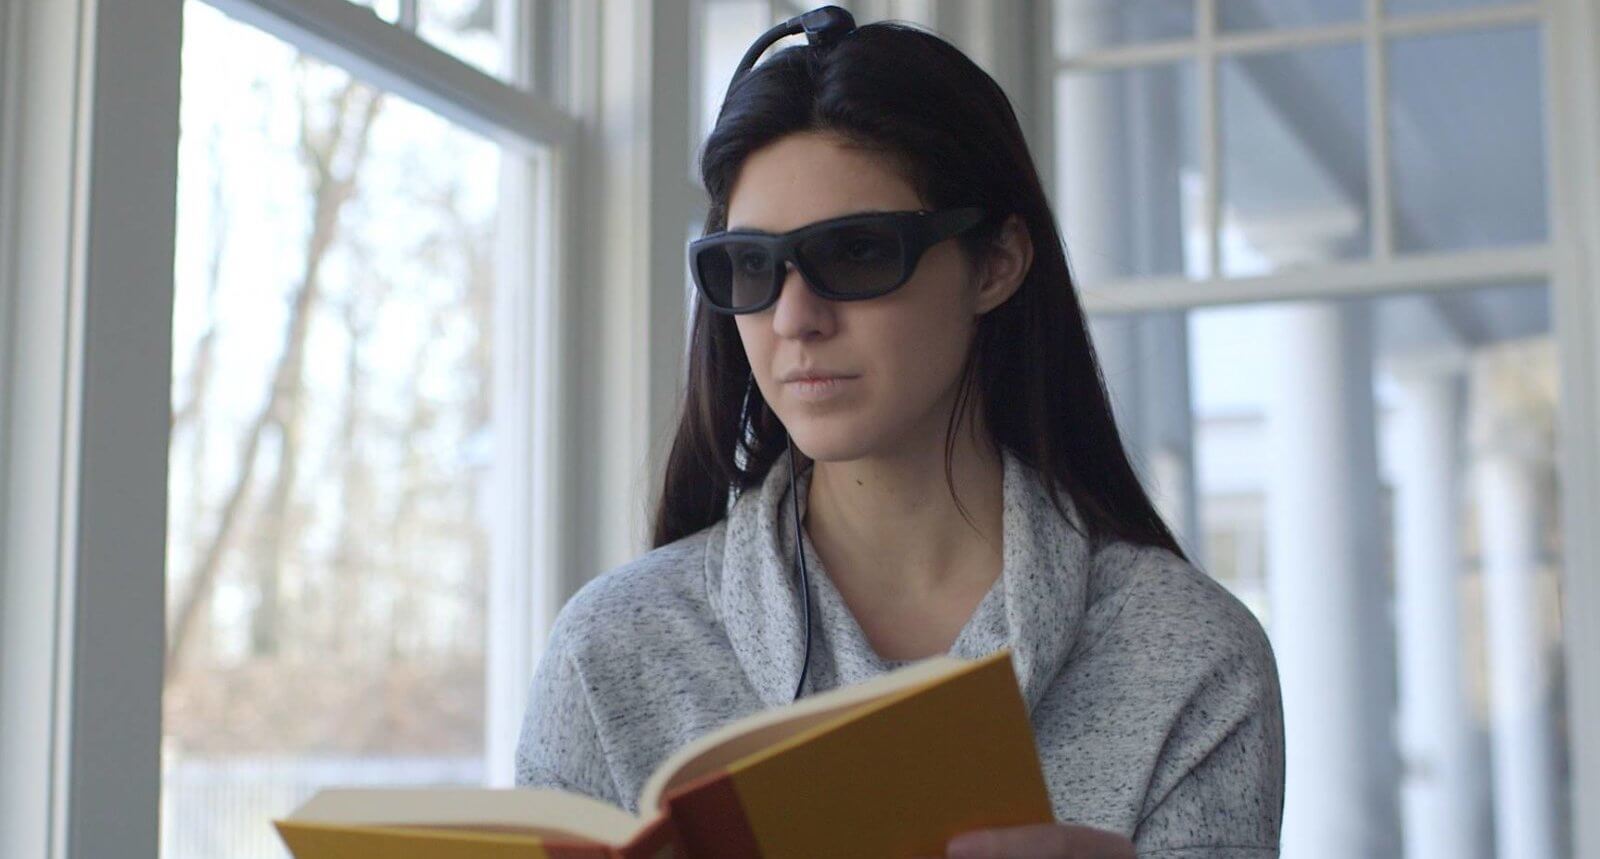 New smart glasses would make a person not to be distracted from work